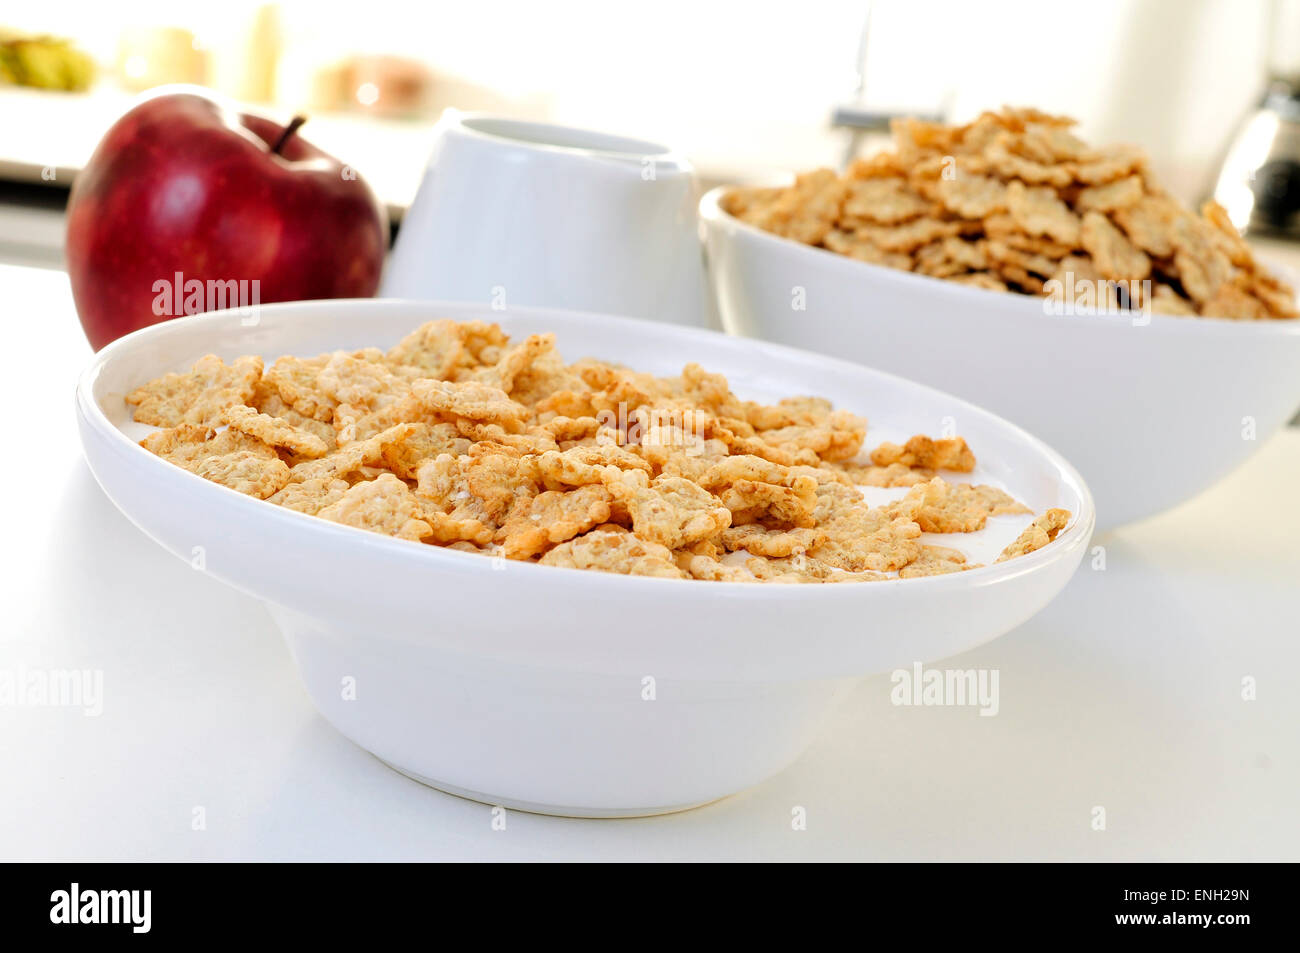 closeup of a bowl with yogurt and oatmeal cereals for breakfast and a red apple on the kitchen table Stock Photo